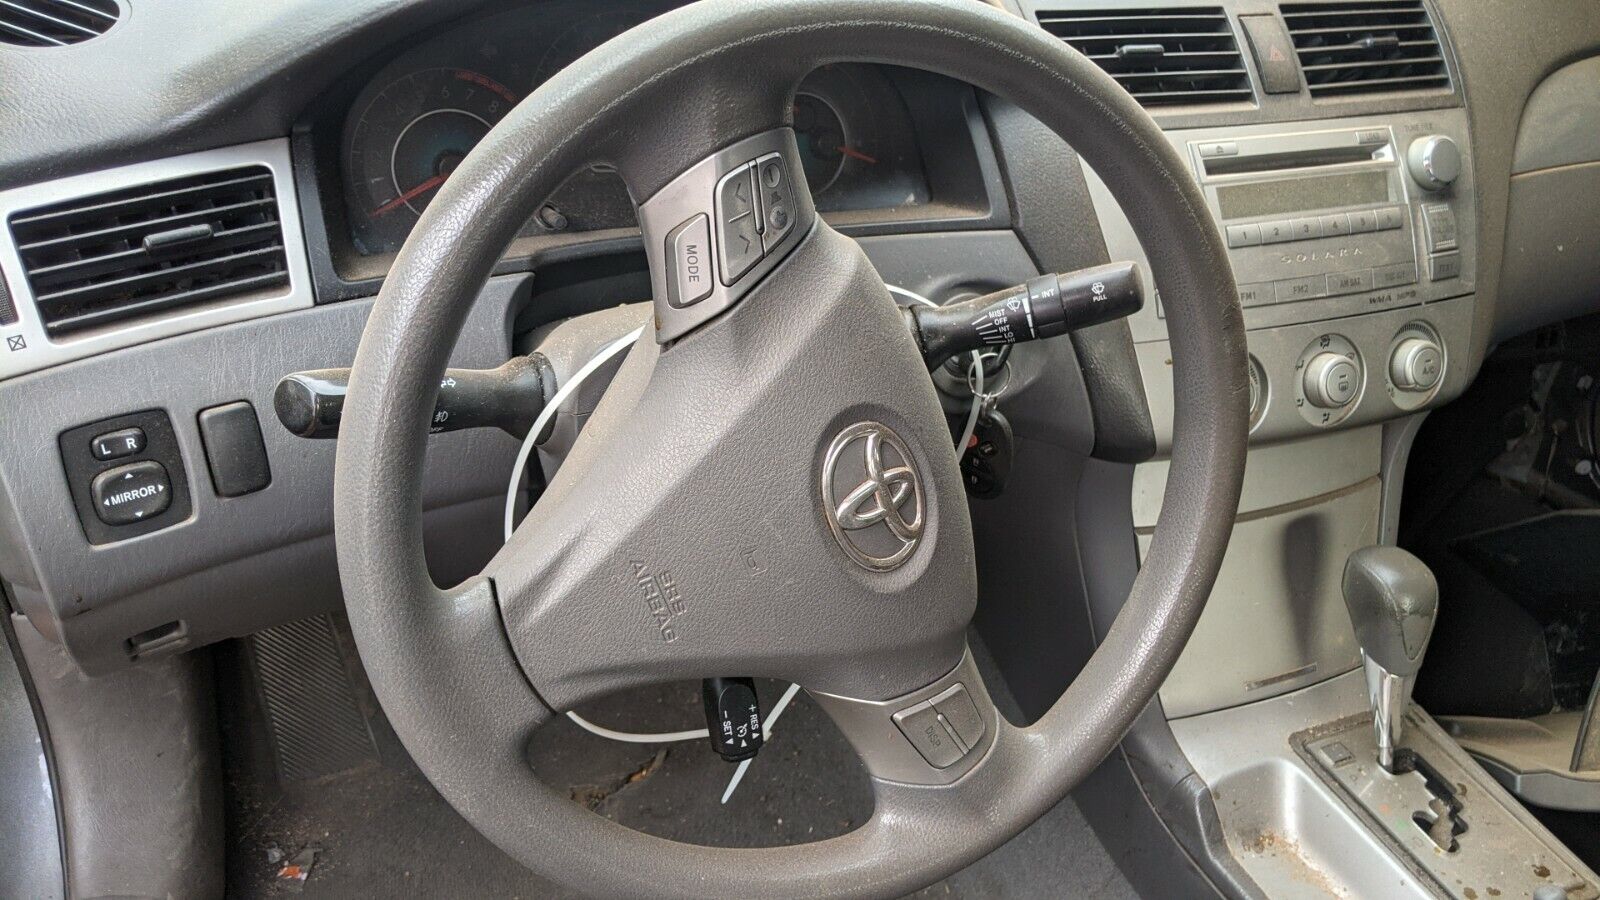  2007 2008 TOYOTA SOLARA Driver Steering Wheel WITH AIRB